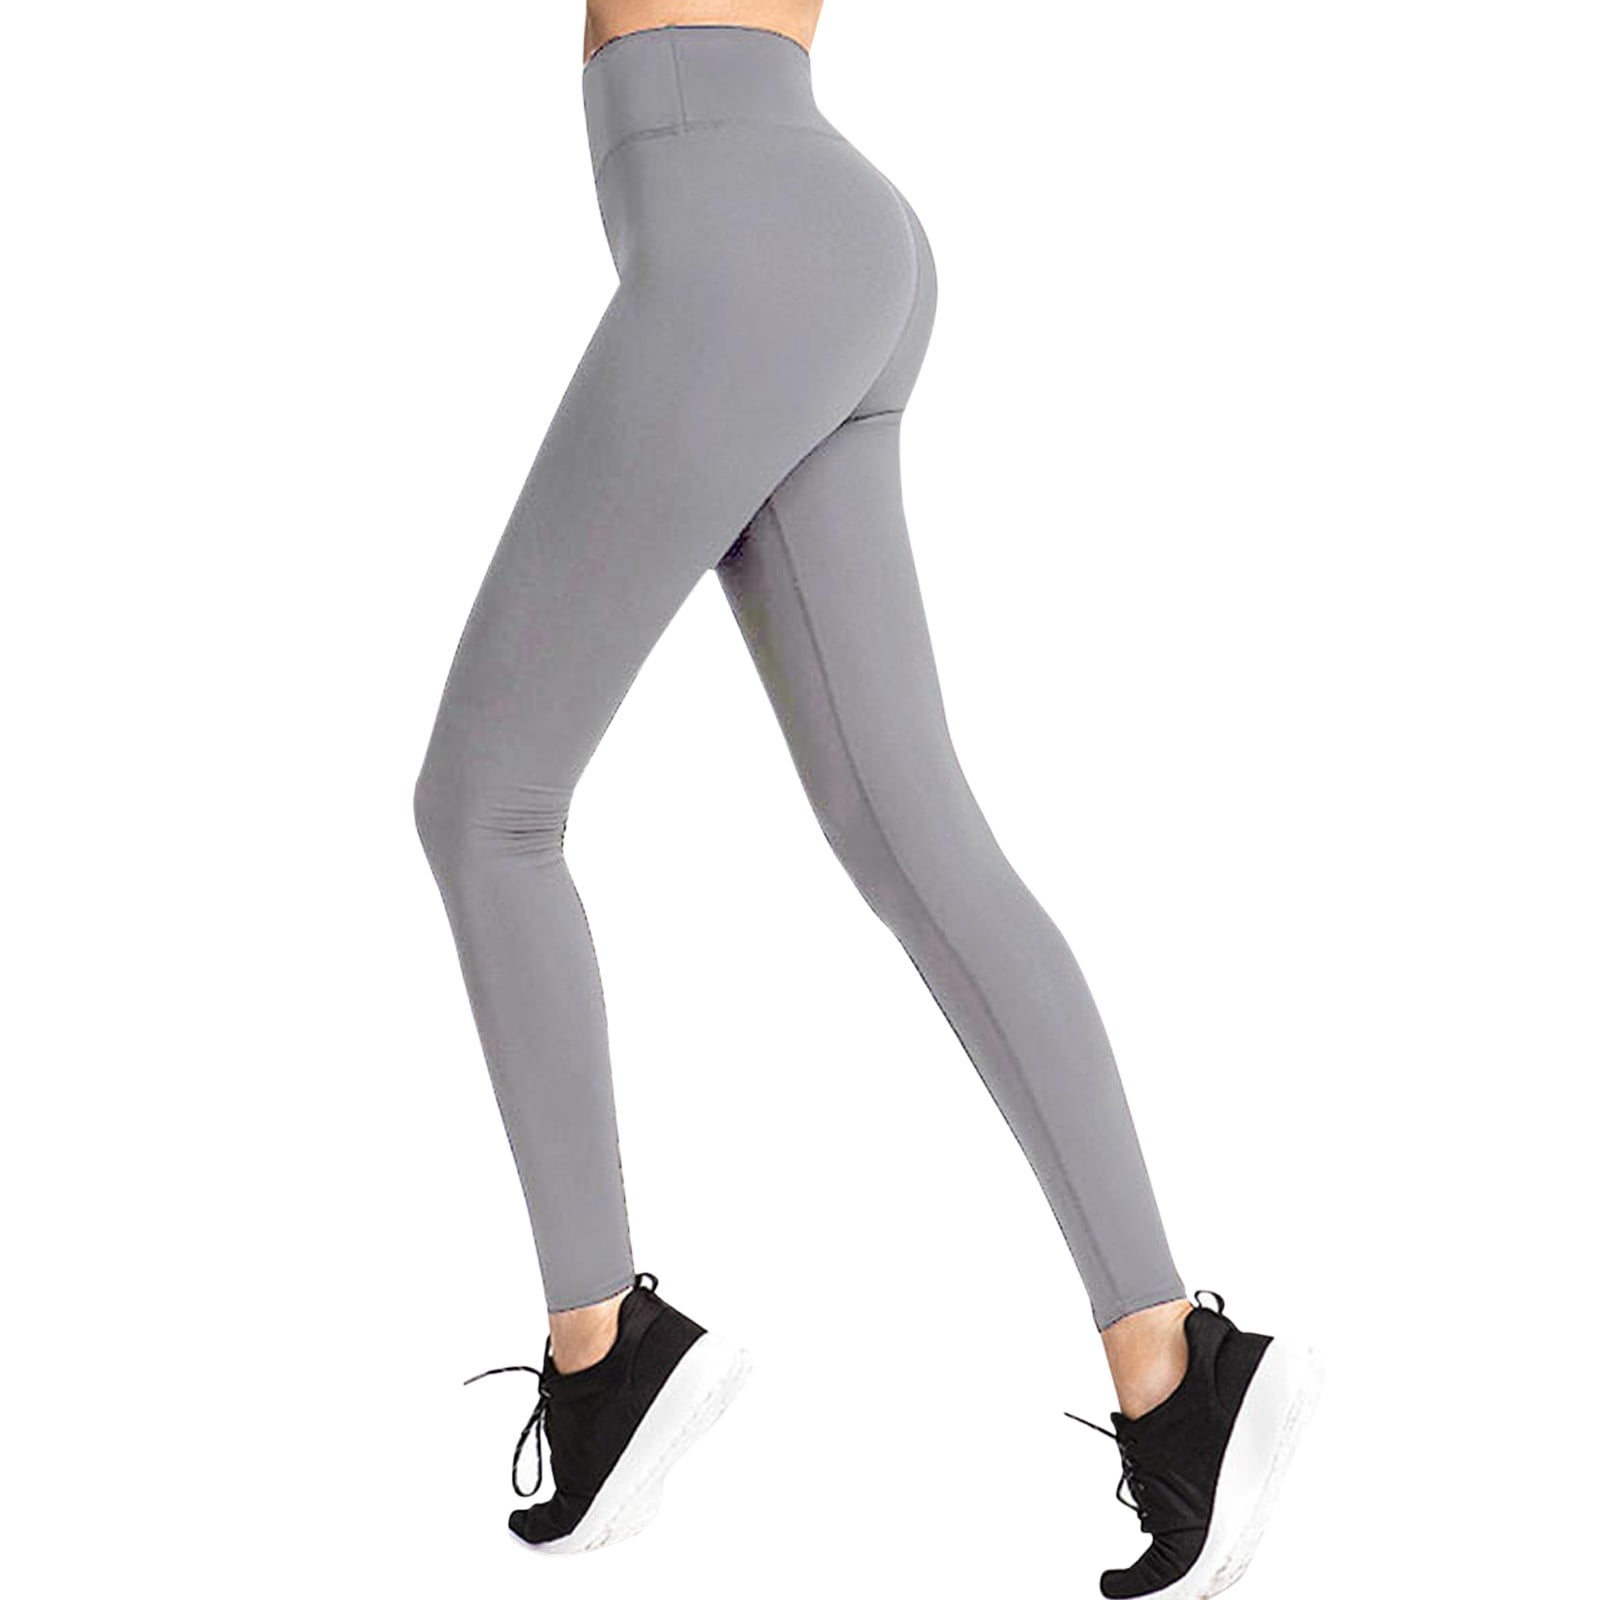 kpoplk Yoga Pants With Pockets For Women,Women's High Waist Yoga Pants with  Pockets, Tummy Control Workout Running 4 Way Stretch Yoga Leggings(Grey,L)  